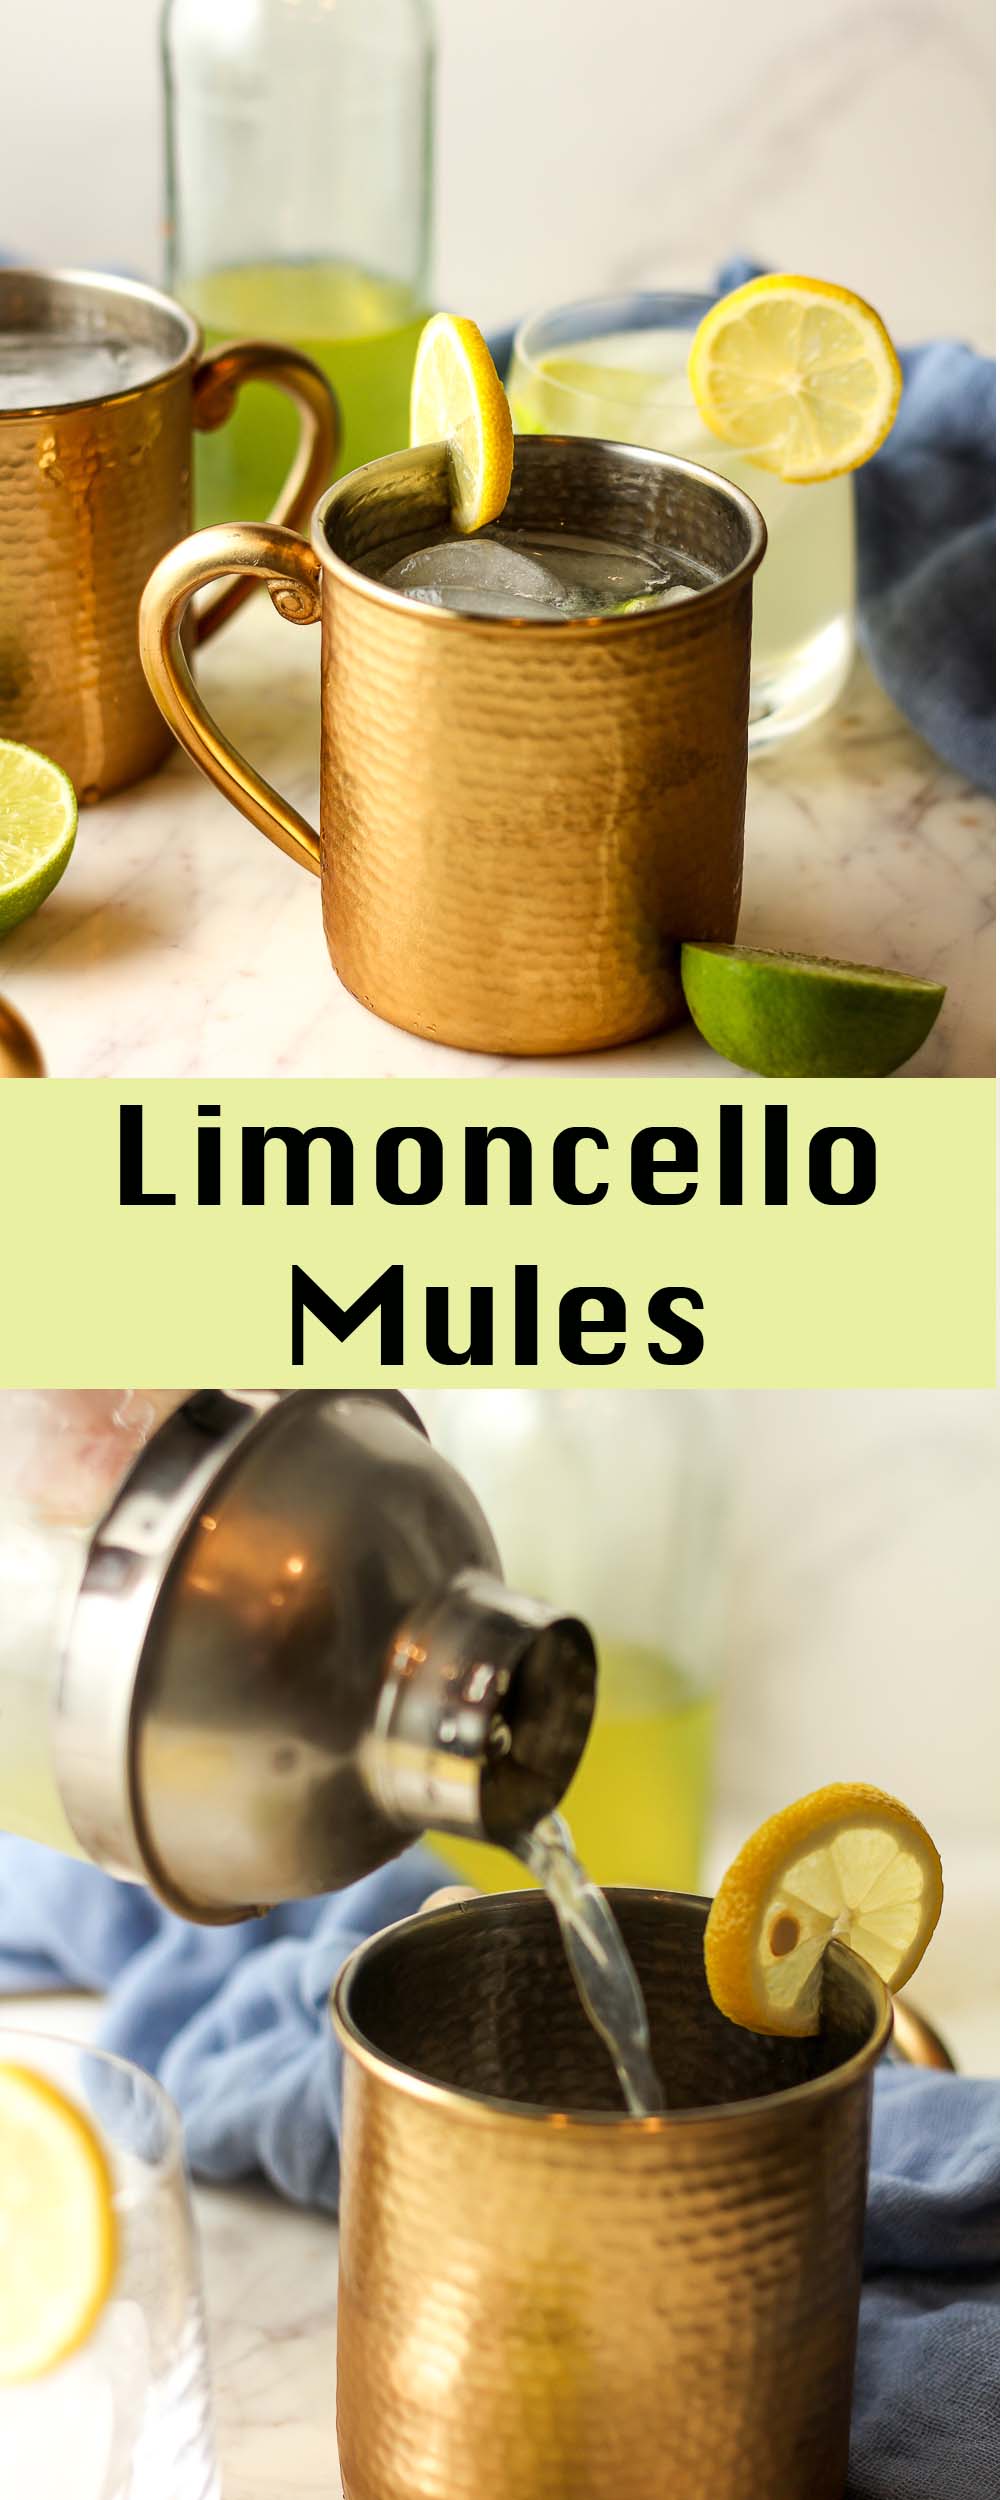 A collage of photos for limoncello mules.